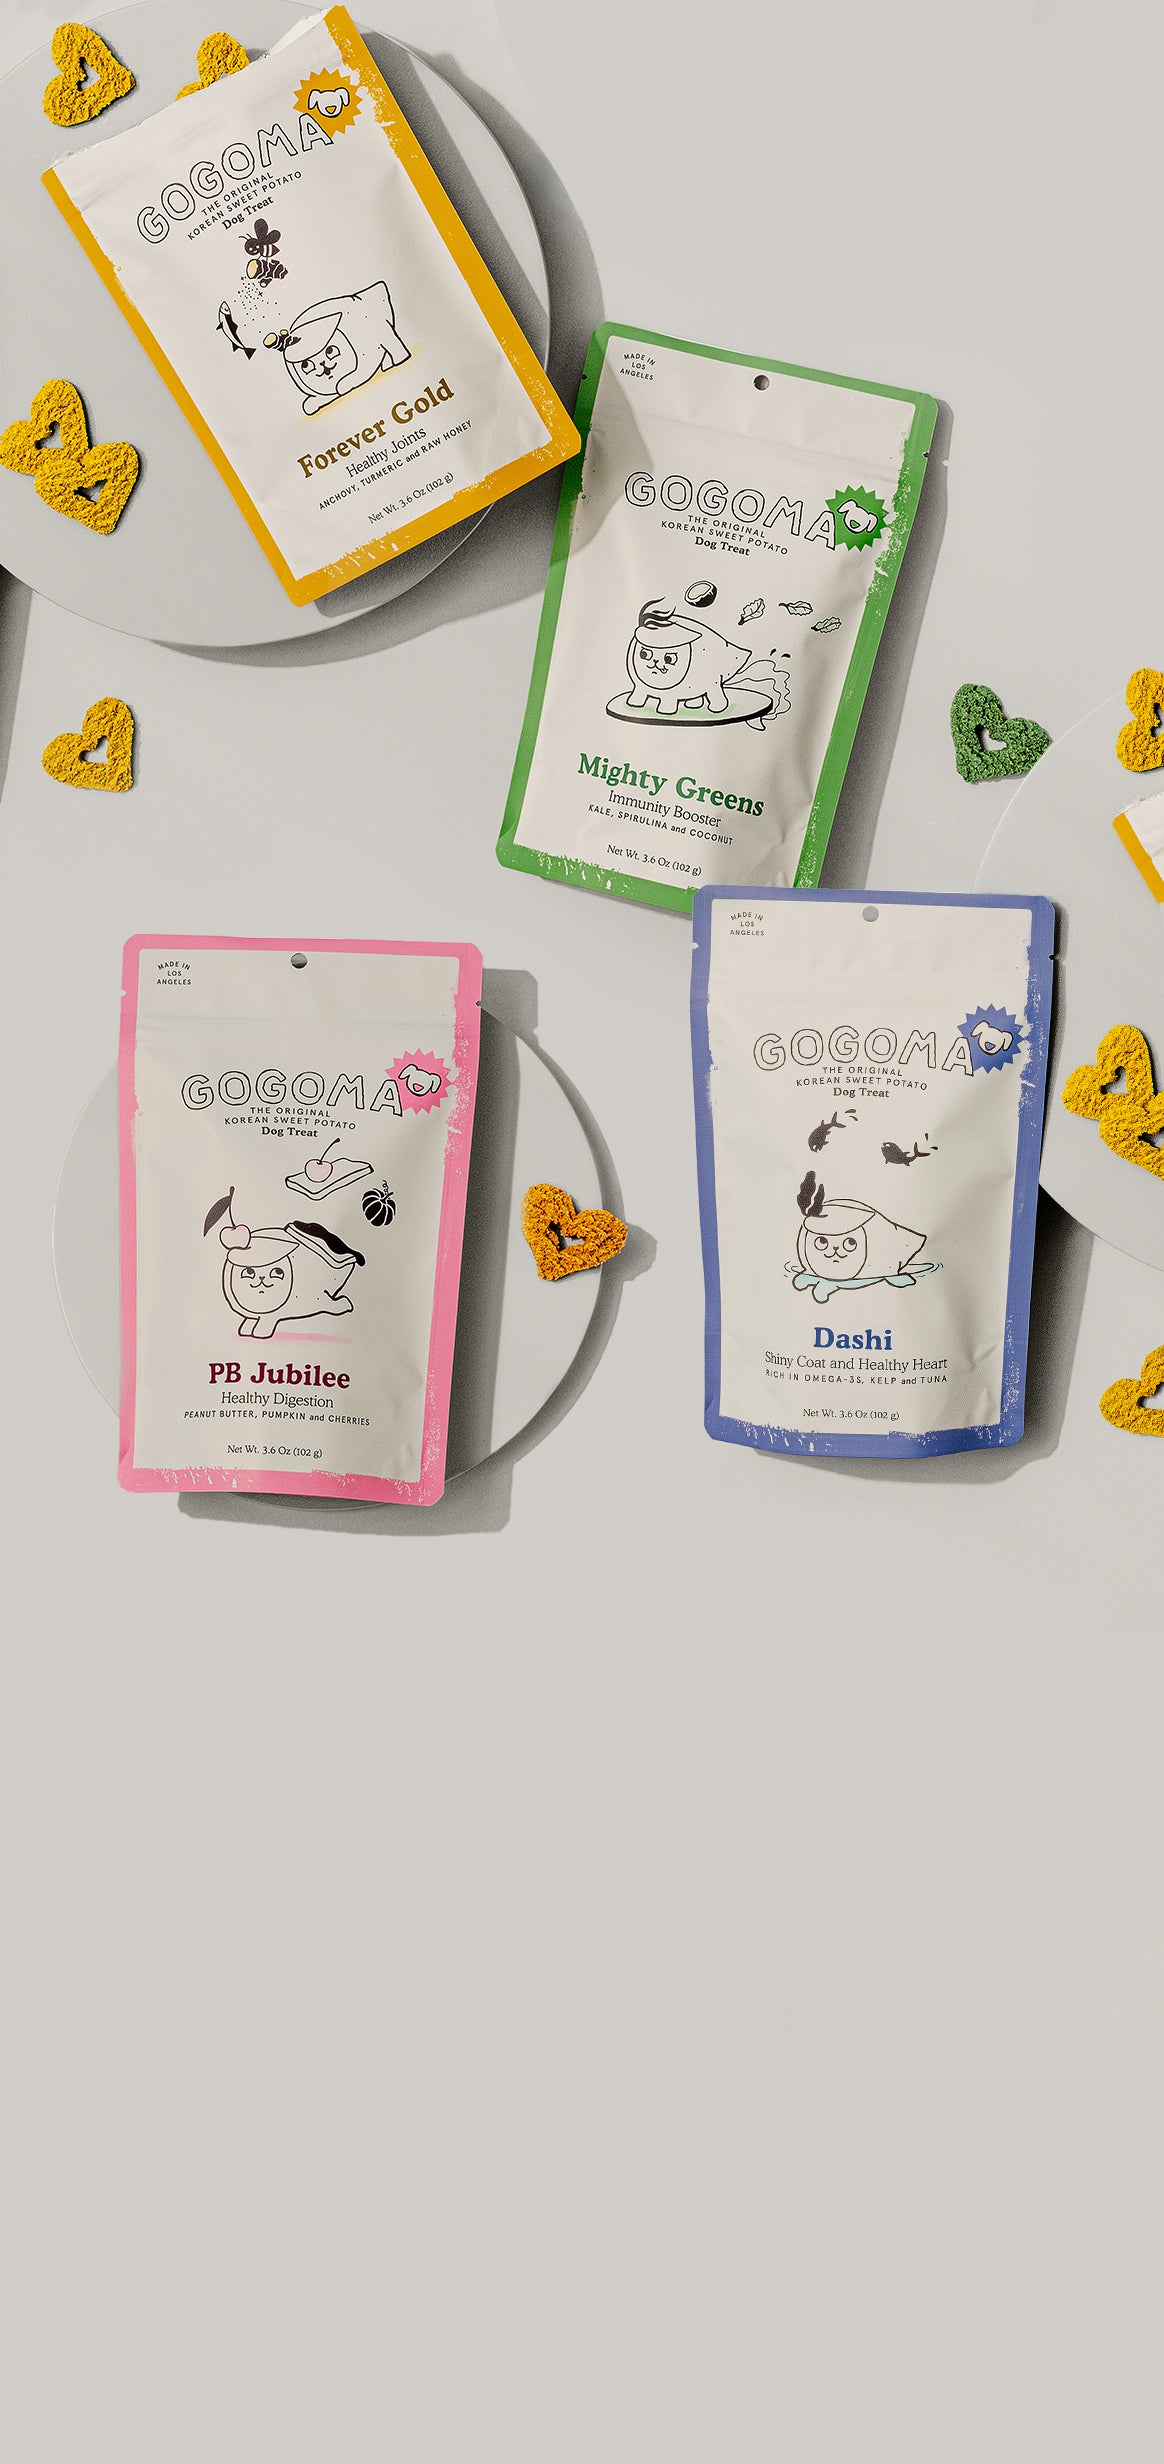 Gogoma is flavorful nutrition packed into irresistible pet treats